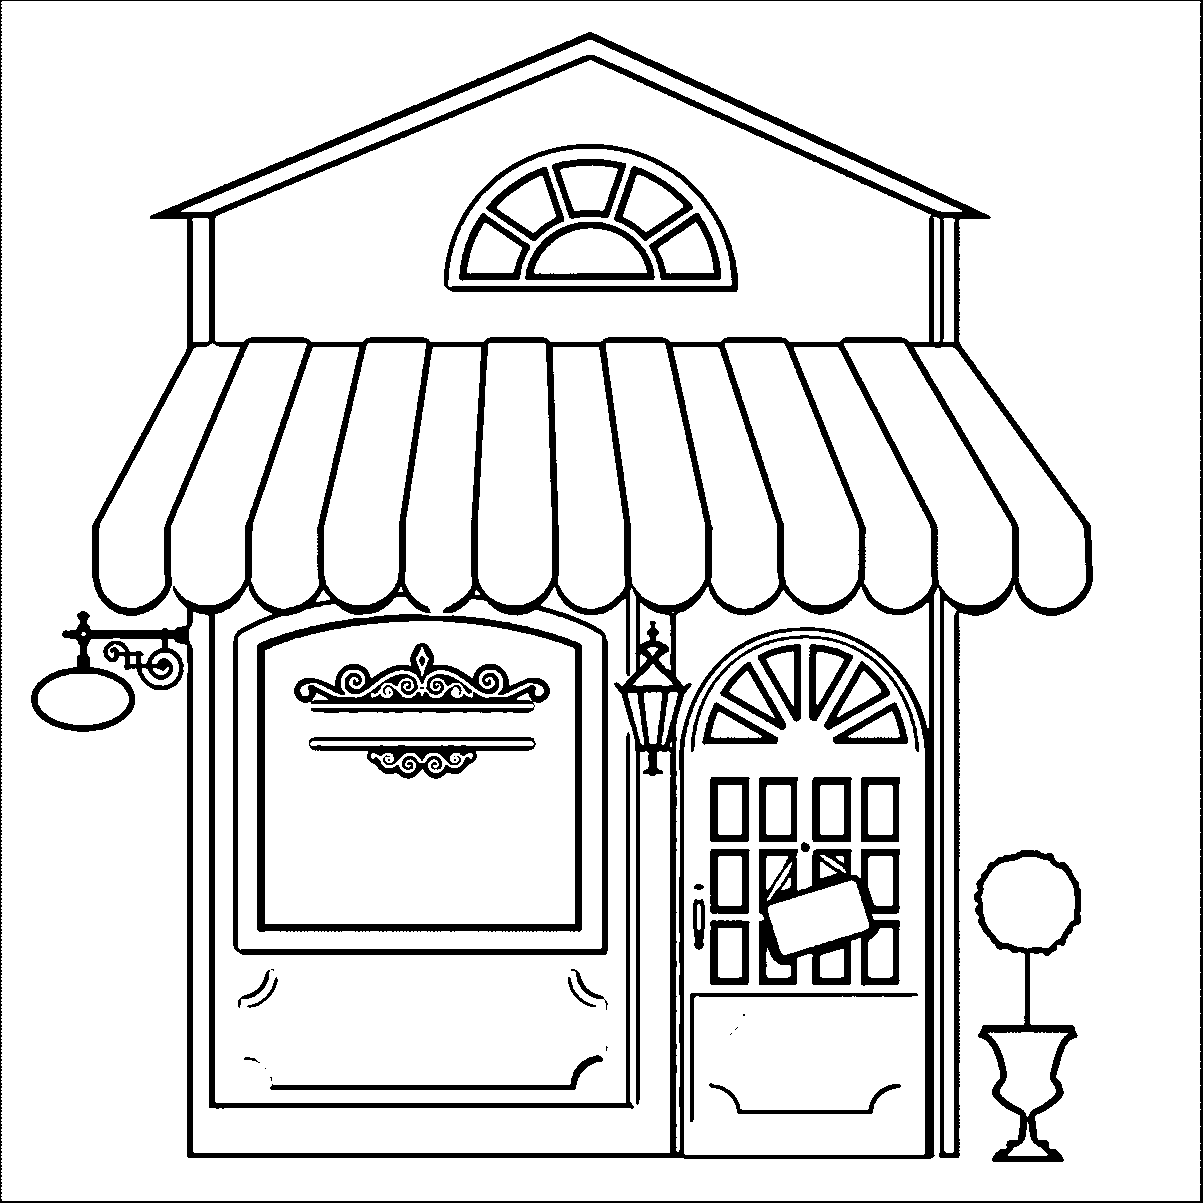 Restaurant building coloring pages